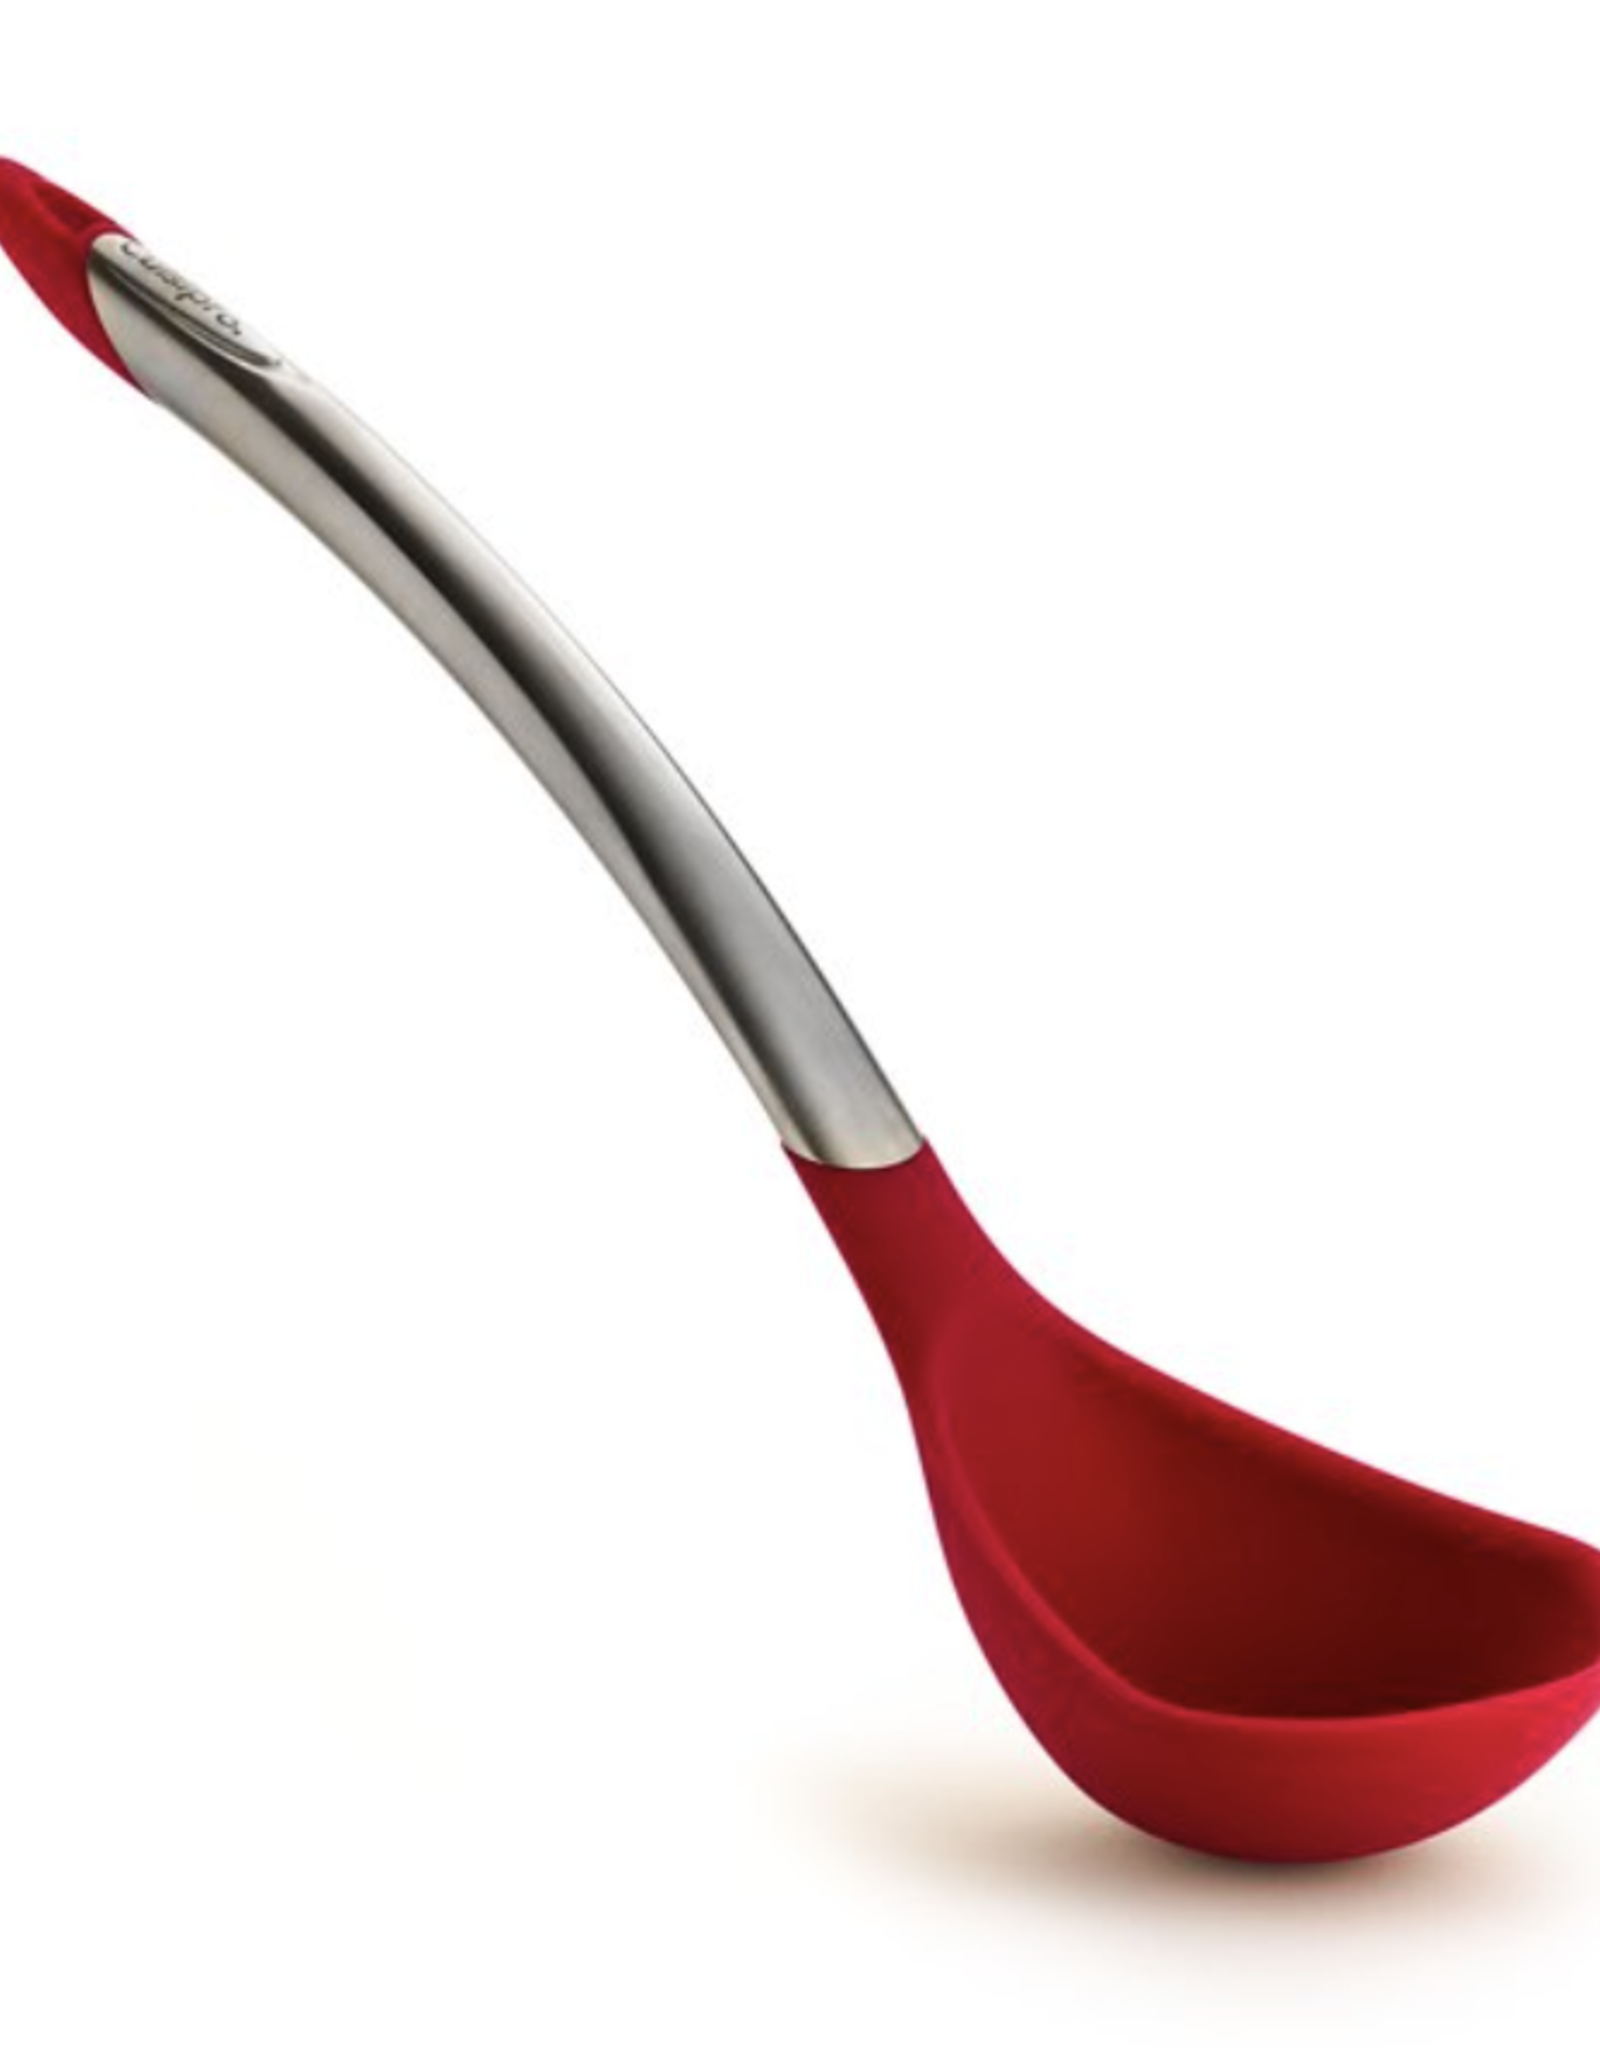 Cuisipro Silicone Ladle, Red - Duluth Kitchen Co